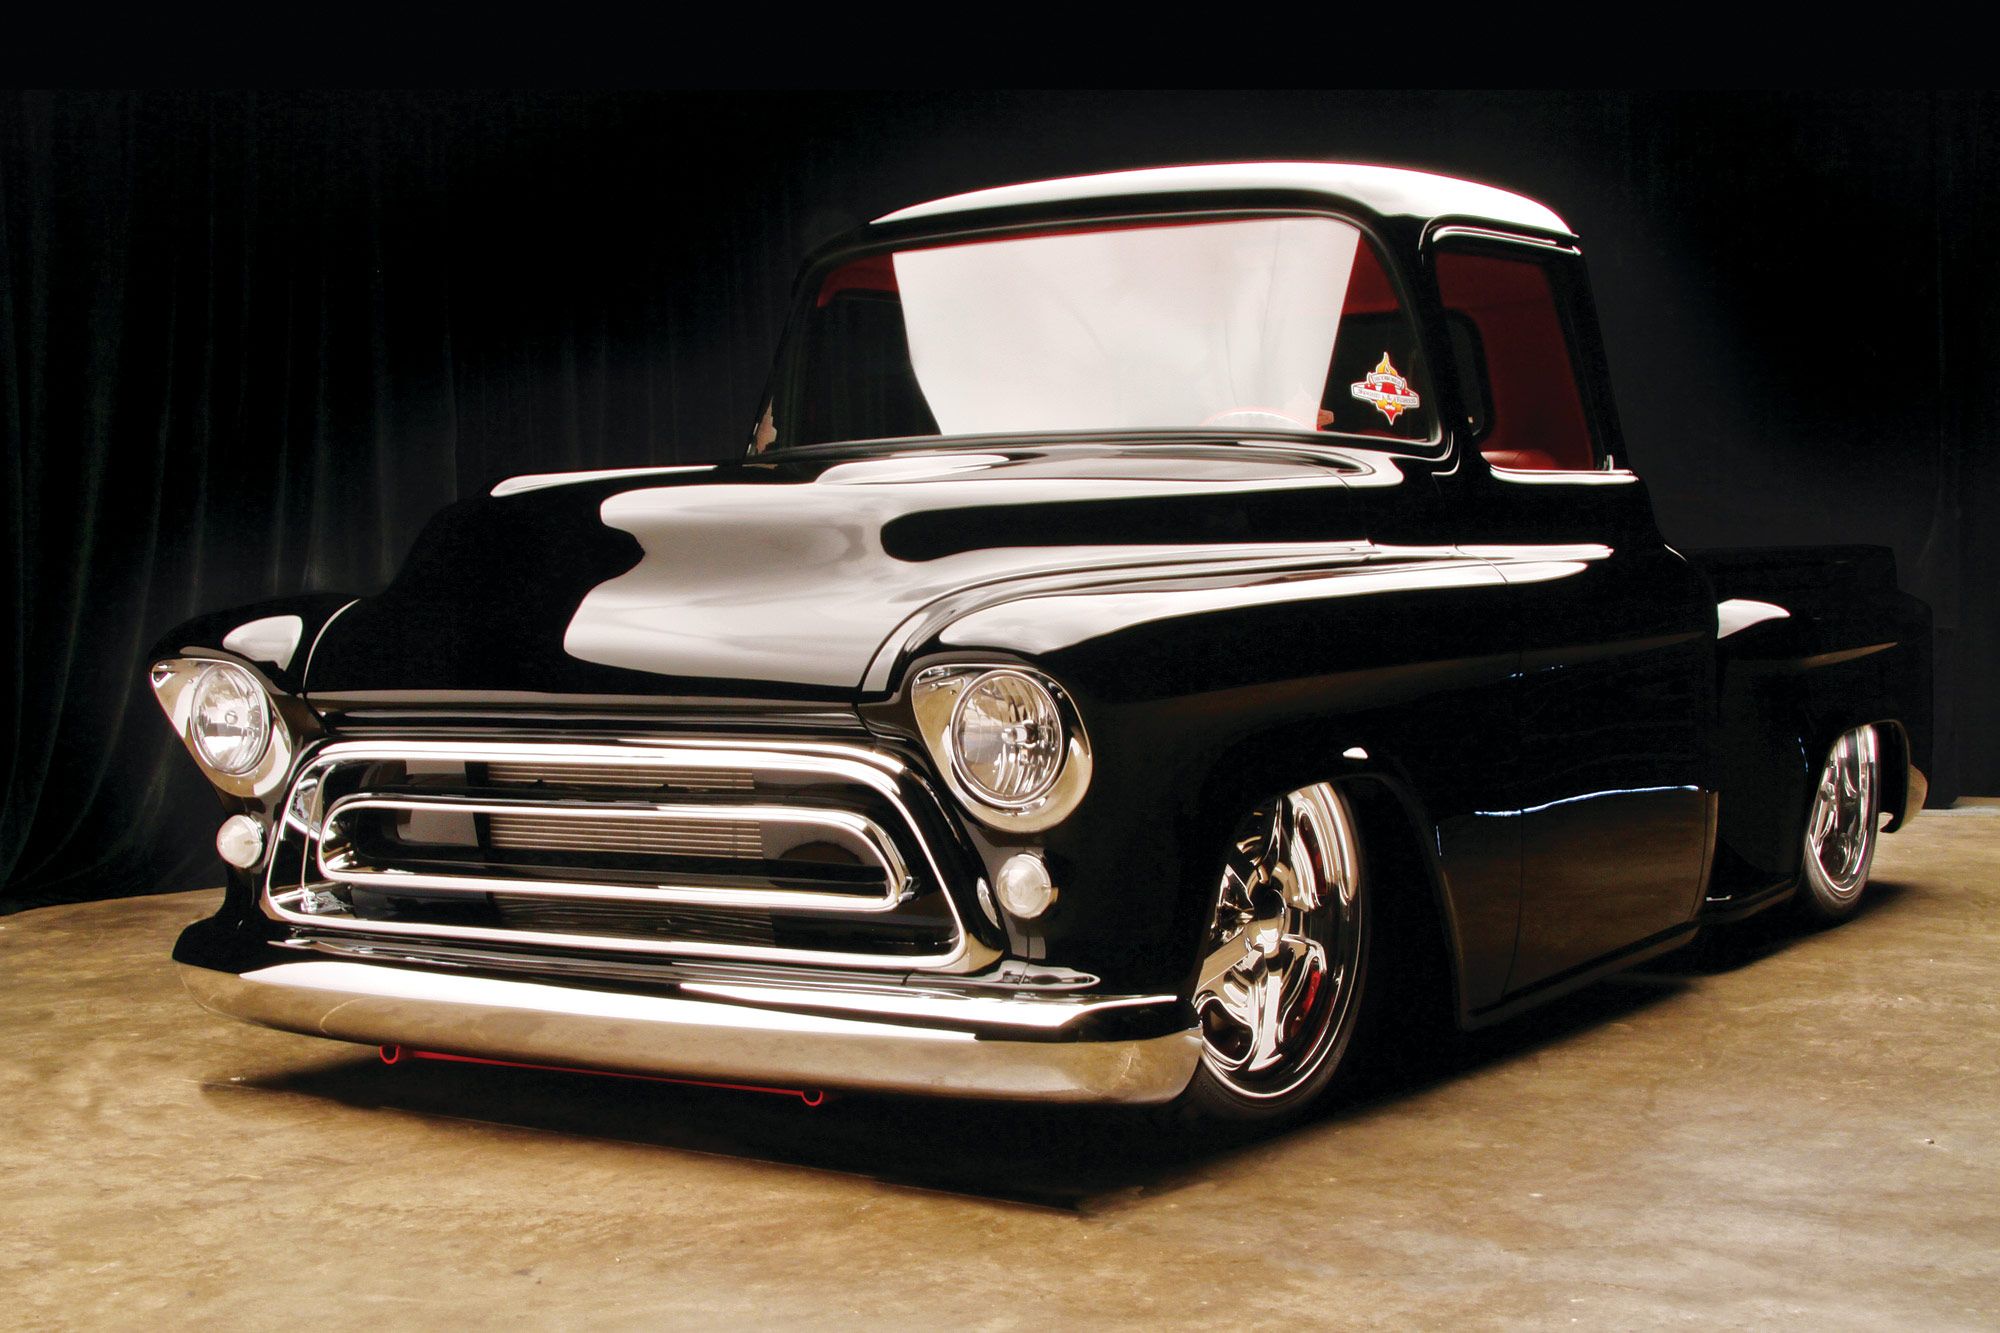 28 Latest Chevy Truck Backgrounds TXI81 4K Ultra HD Wallpapers 2000x1333